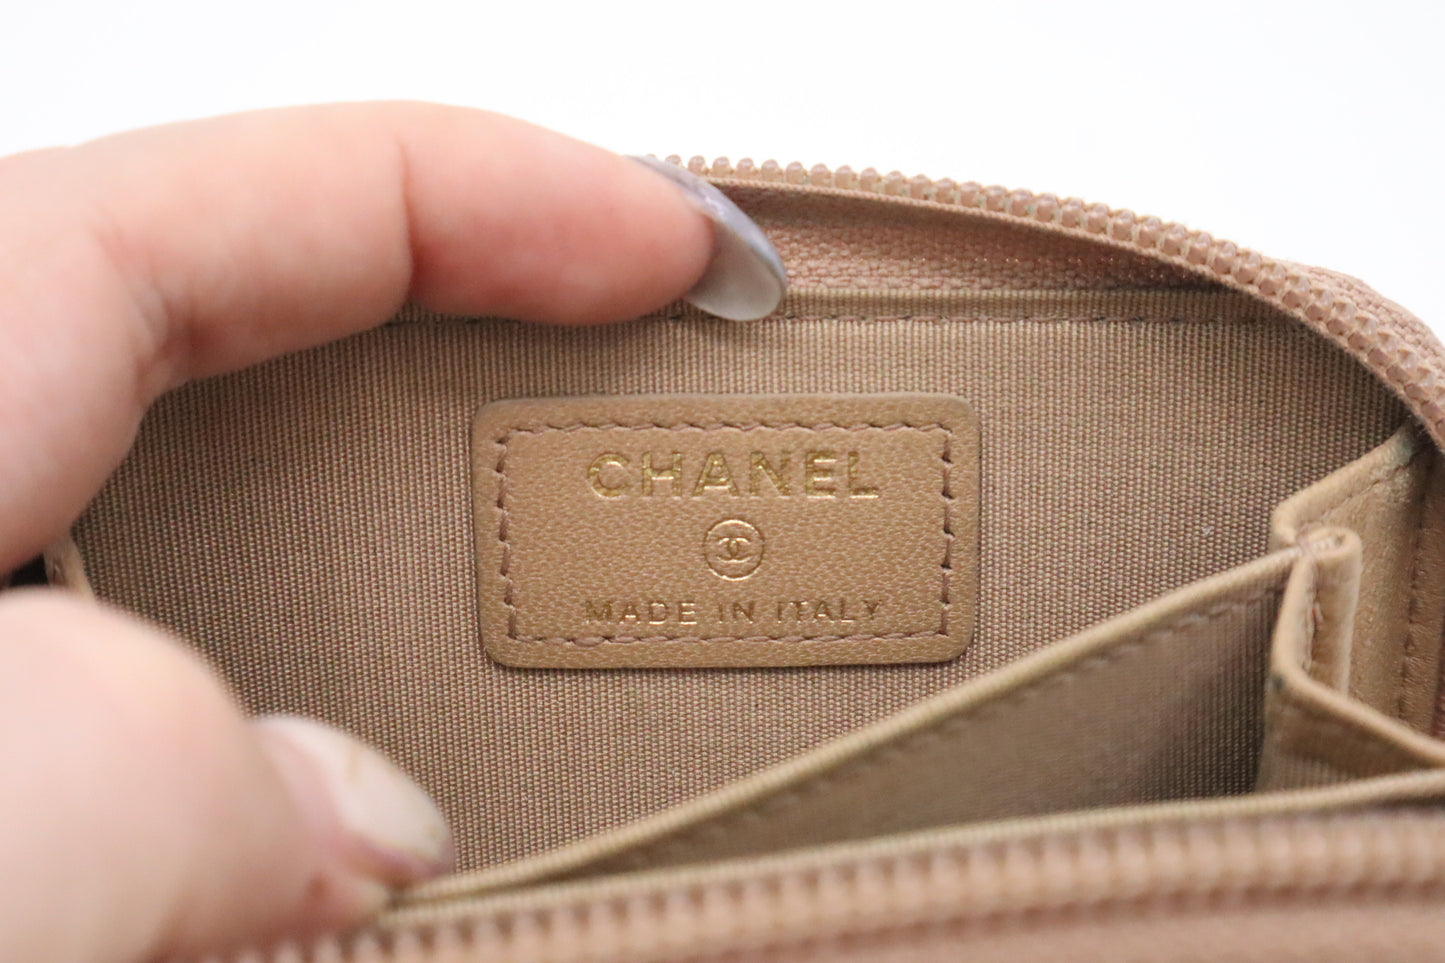 Chanel Boy Card Case in Iridescent Beige Patent Leather